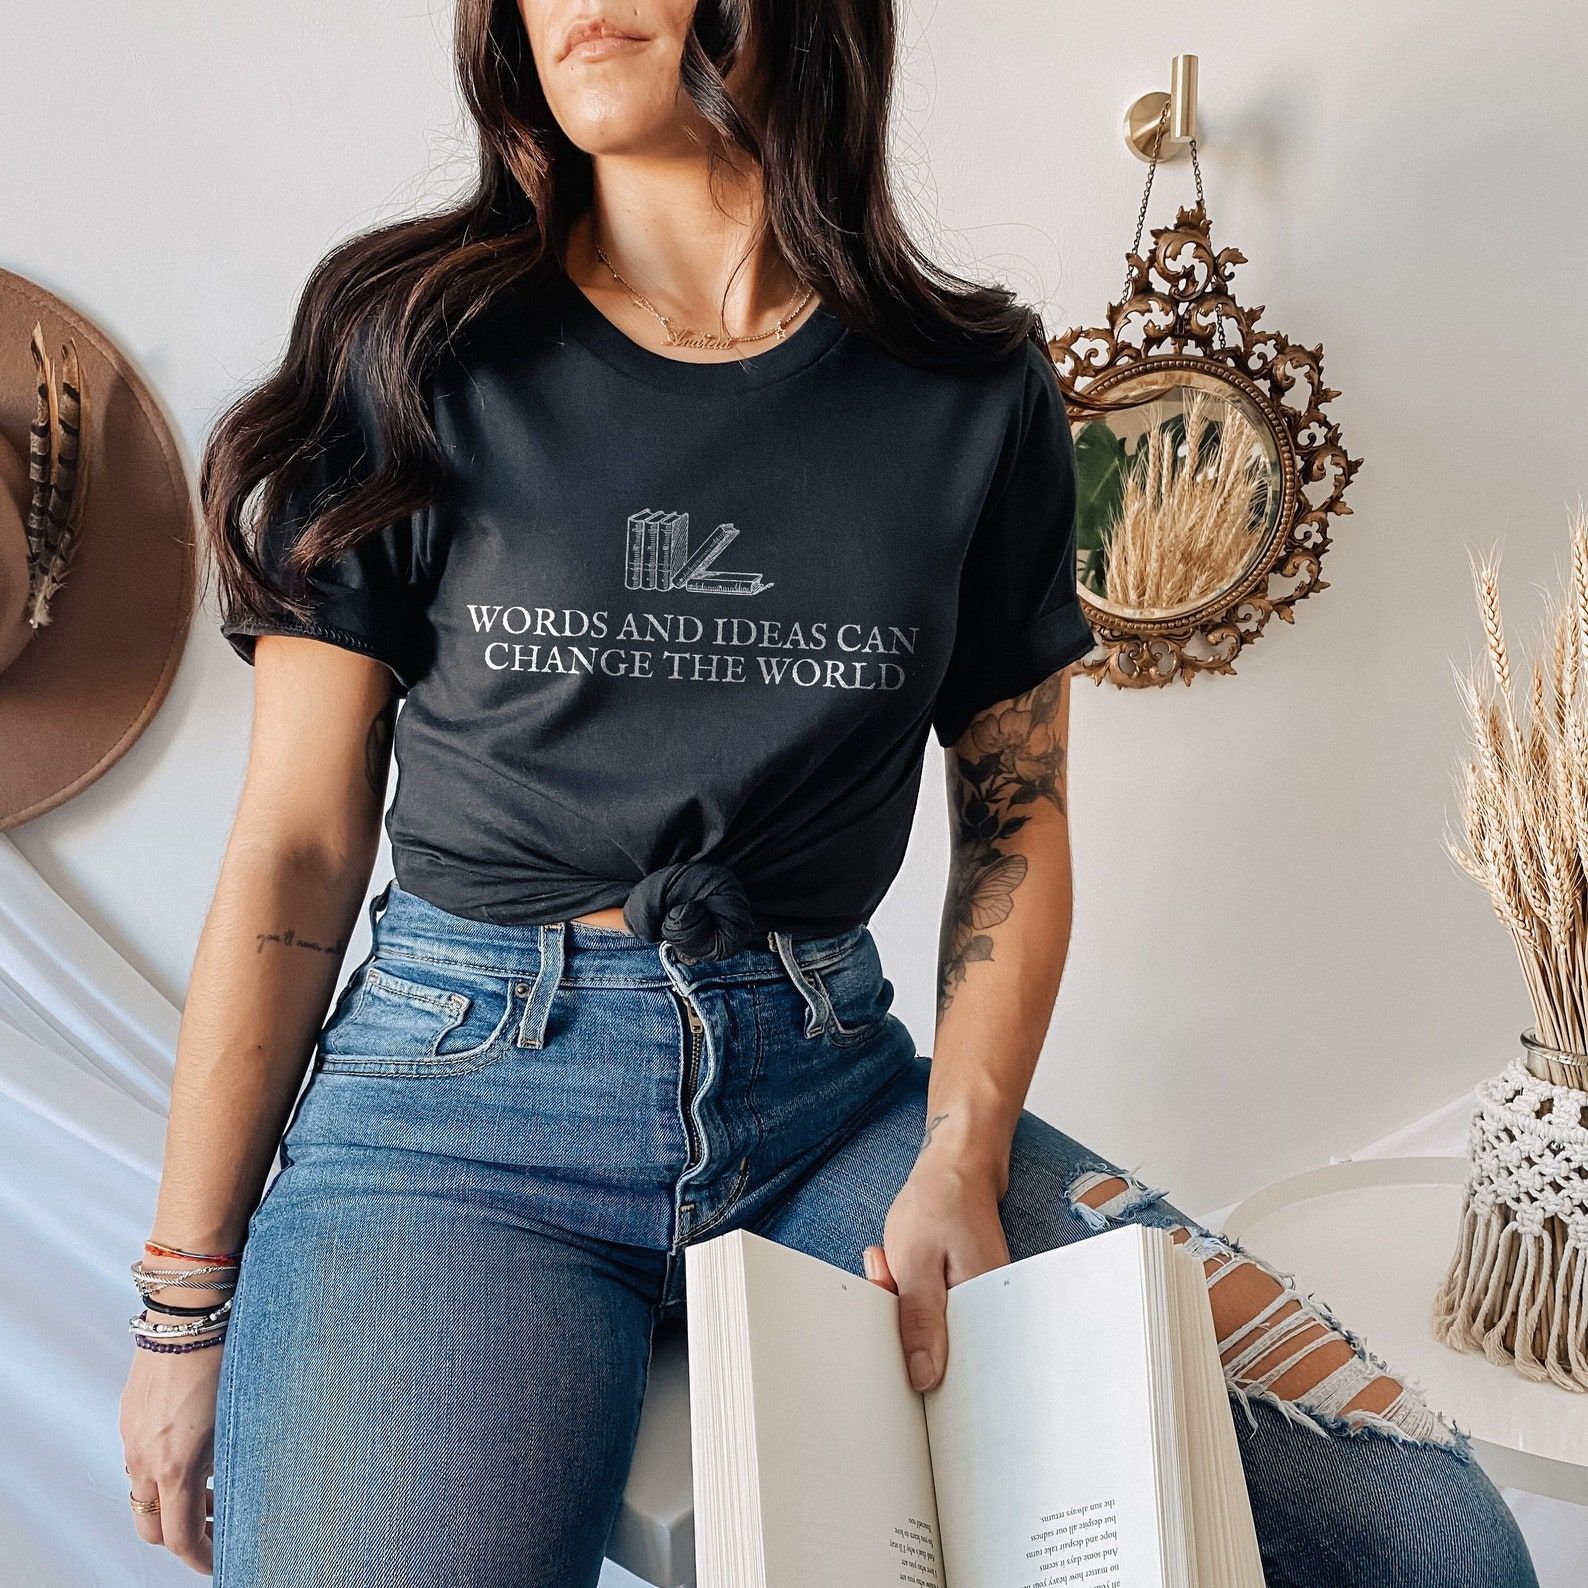 Image of a woman wearing a shirt that reads "words and ideas can change the world." The shirt is black with books on it. 